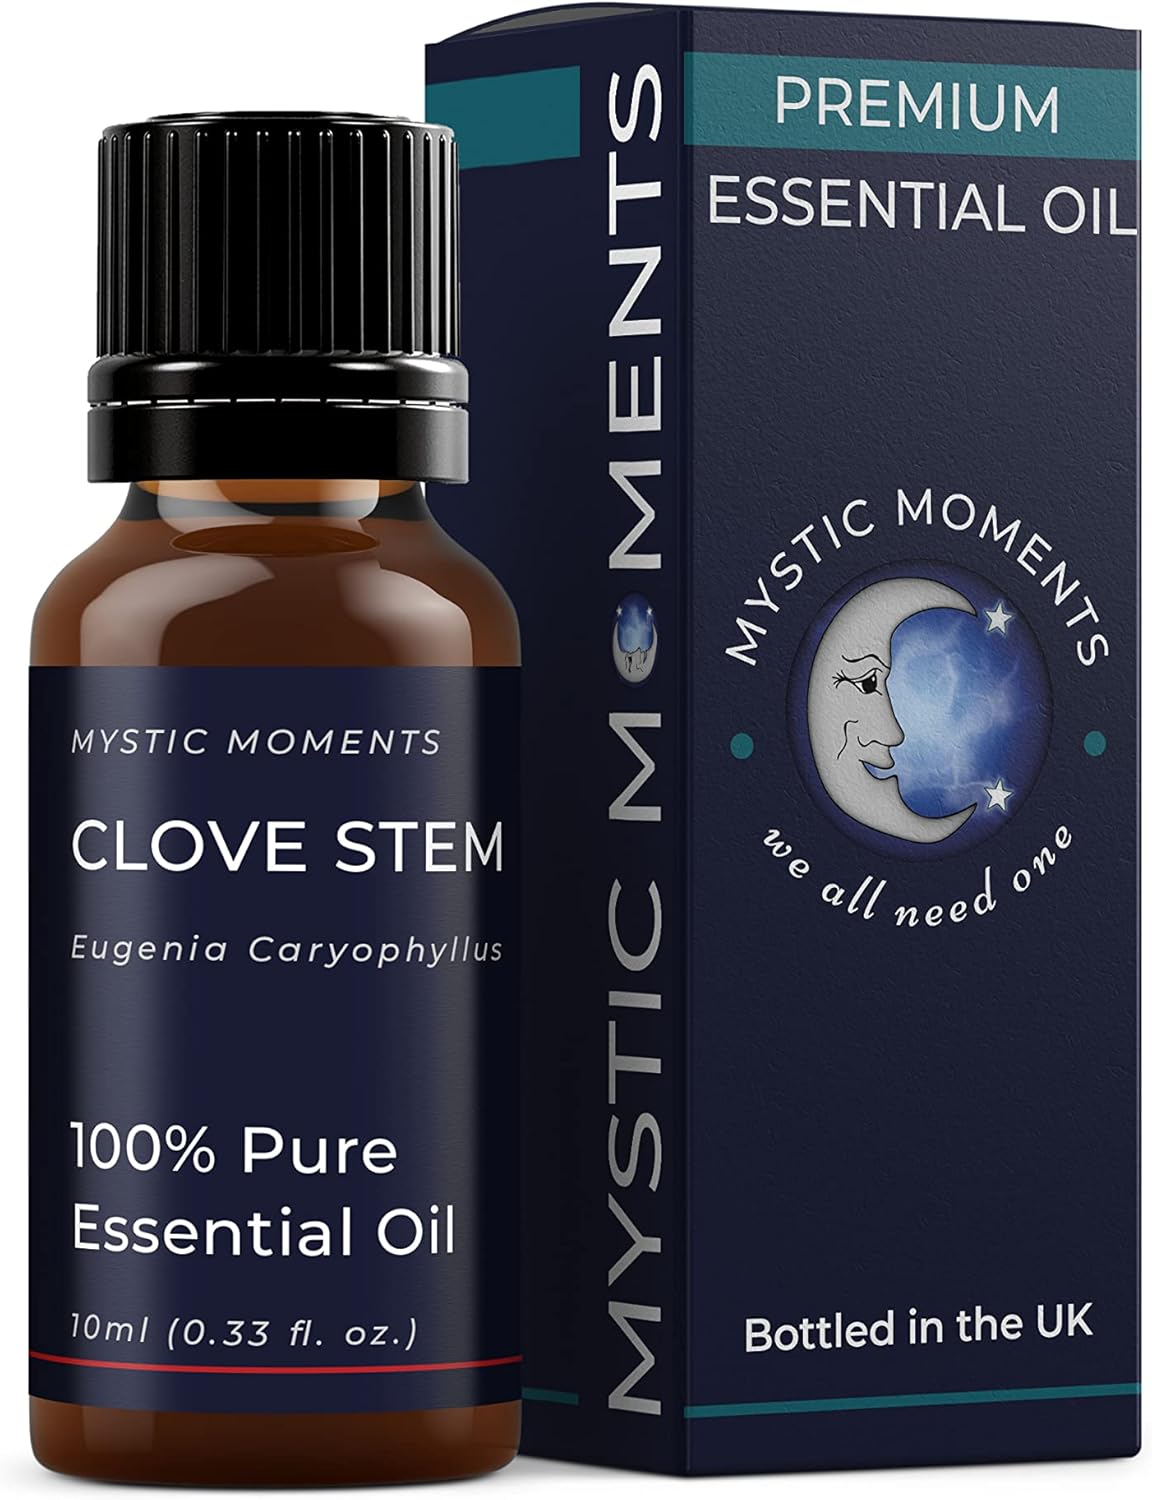 Mystic Moments | Clove Stem Essential Oil 10ml - Pure & Natural oil for Diffusers, Aromatherapy & Massage Blends Vegan GMO Free